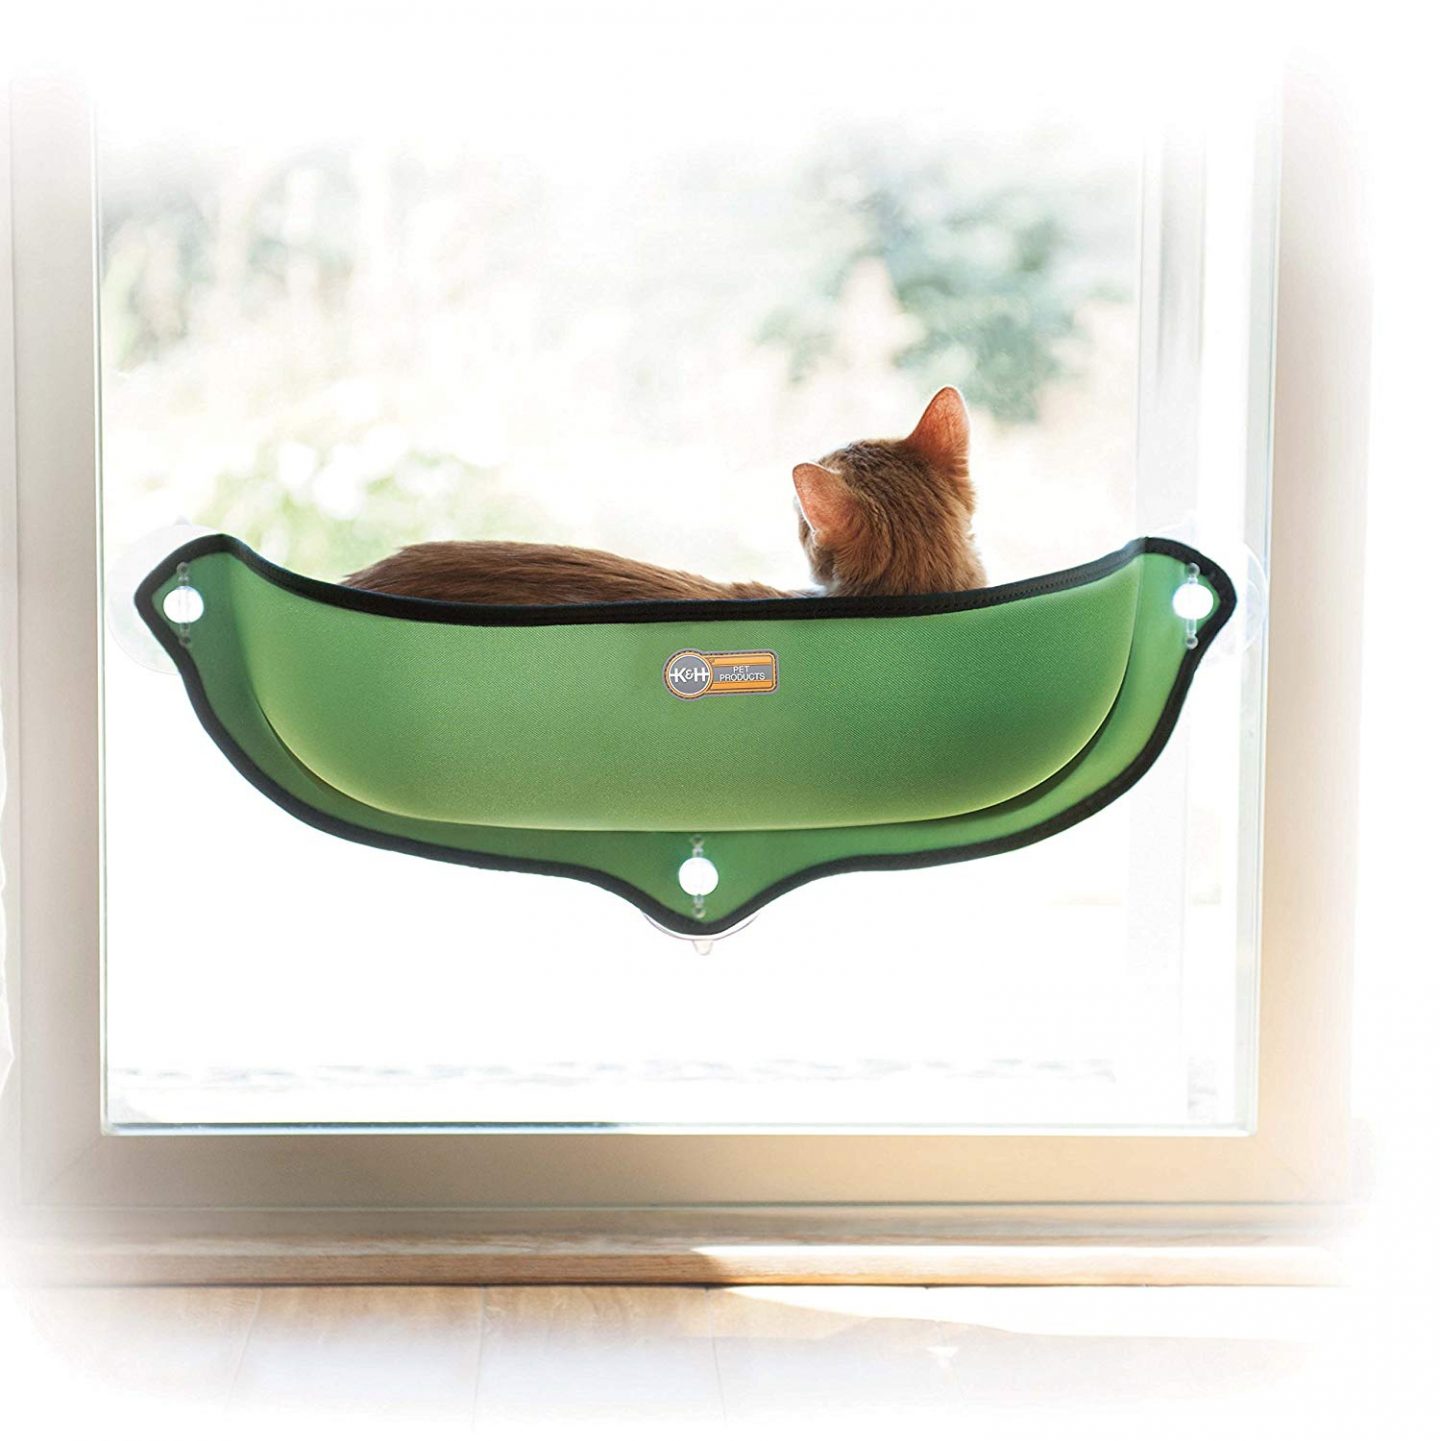 I've seen this car safe window mounted cat lounger around before and I got super excited.  It's just to cool and really makes me want an adventure cat.